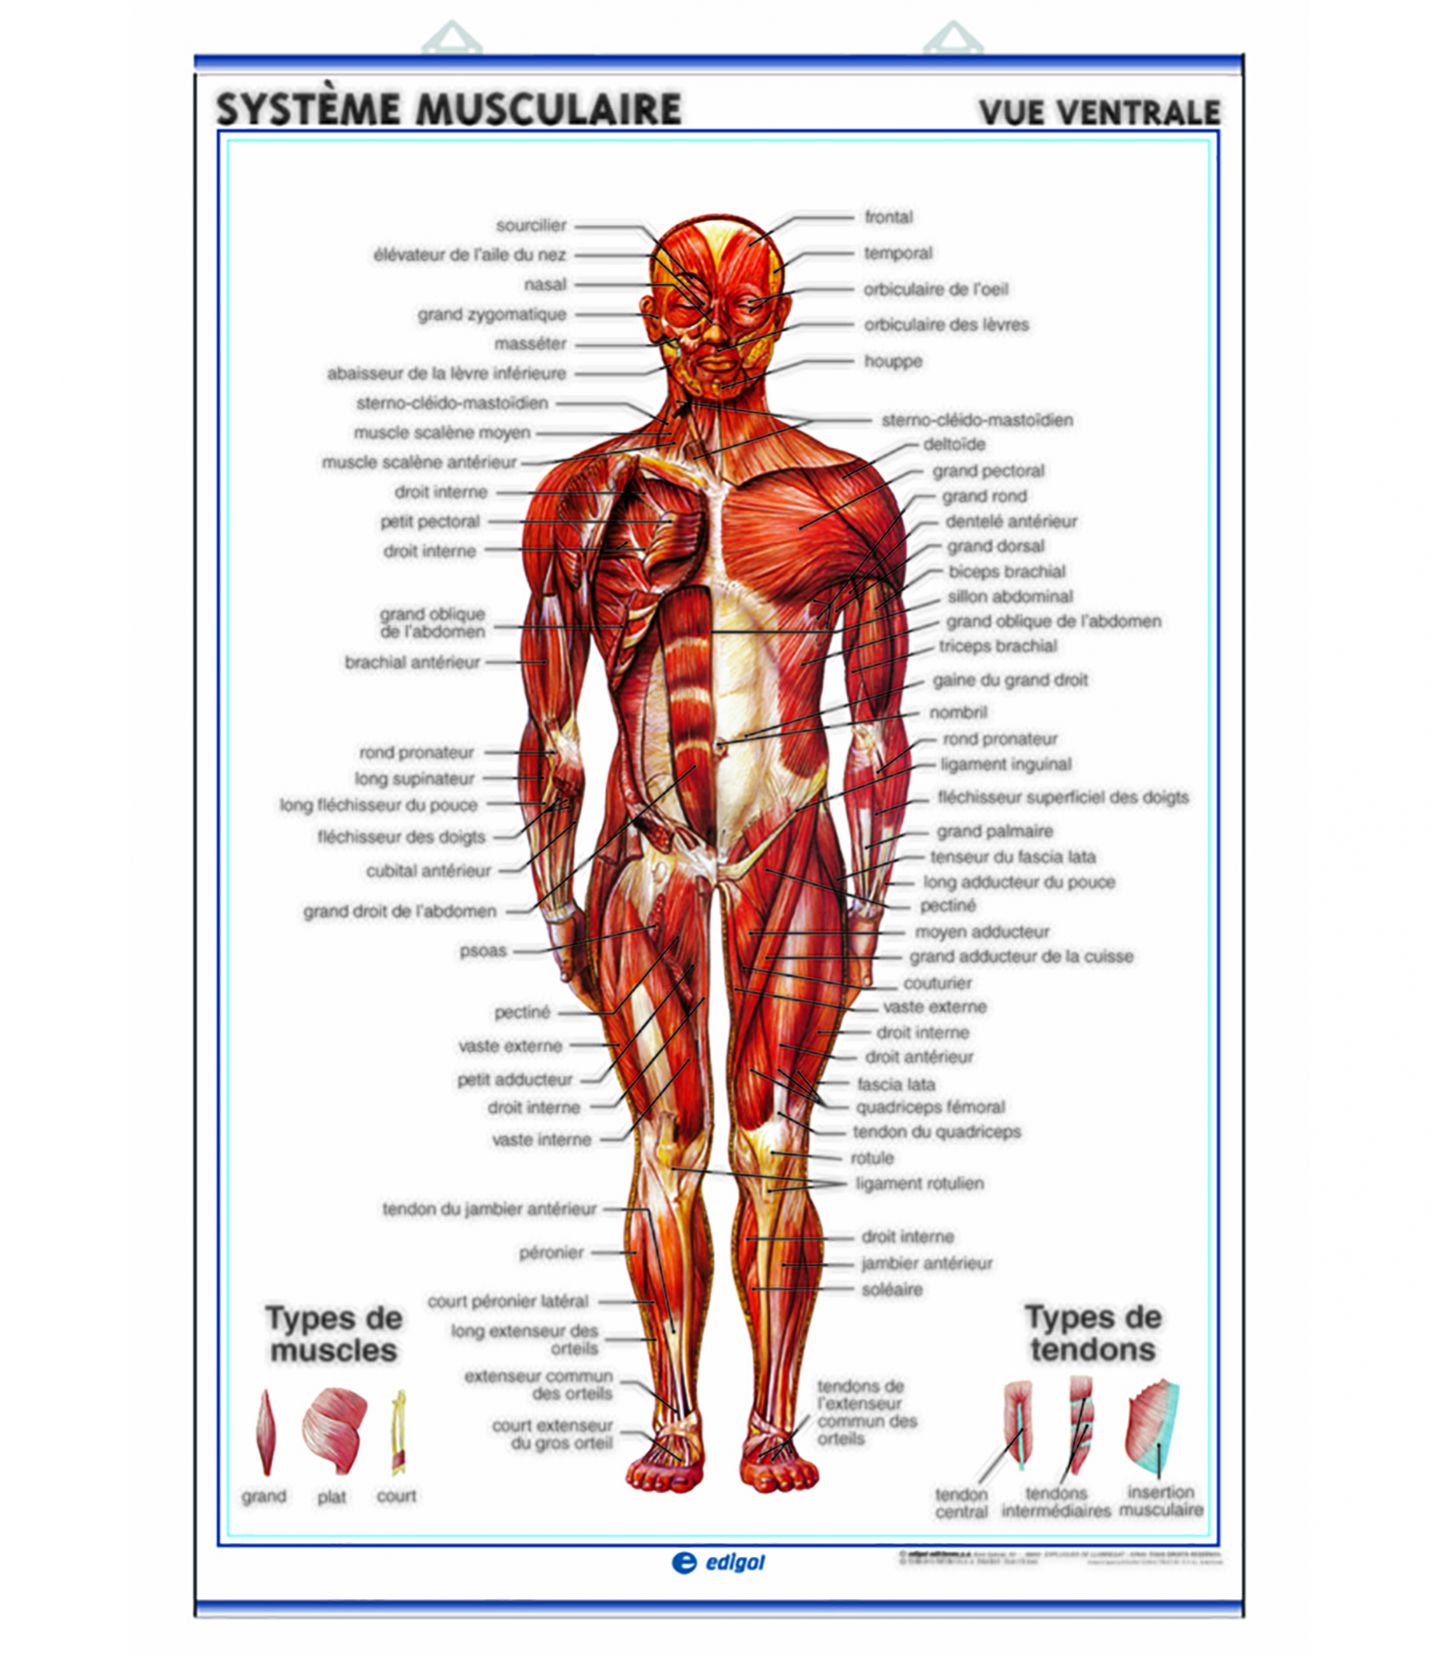 Anatomie musculaire humaine, Anatomie du corps, Anatomie du corps humain